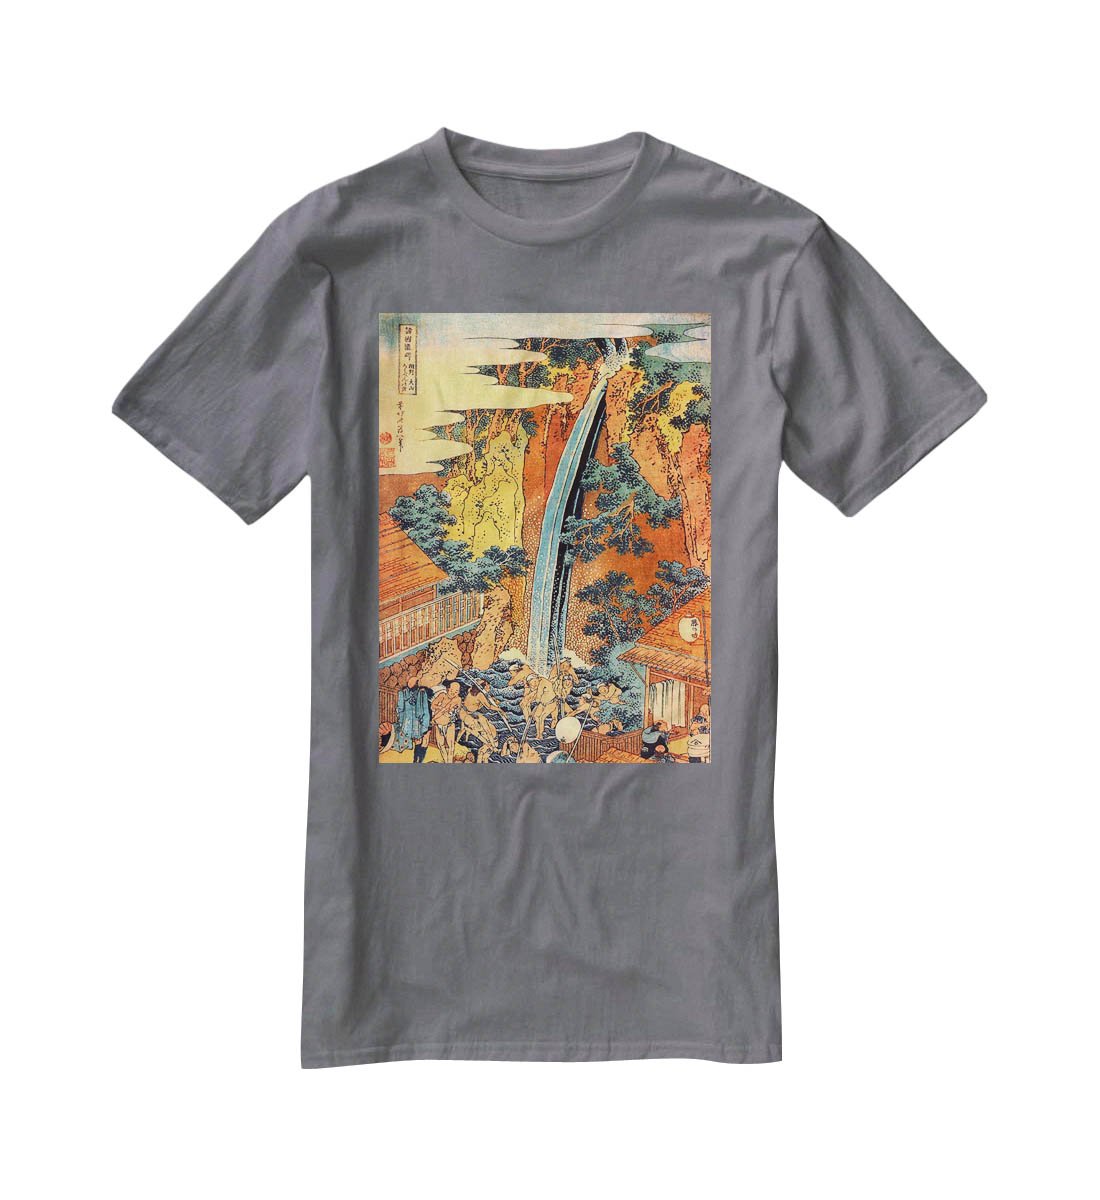 Waterfalls in all provinces 2 by Hokusai T-Shirt - Canvas Art Rocks - 3